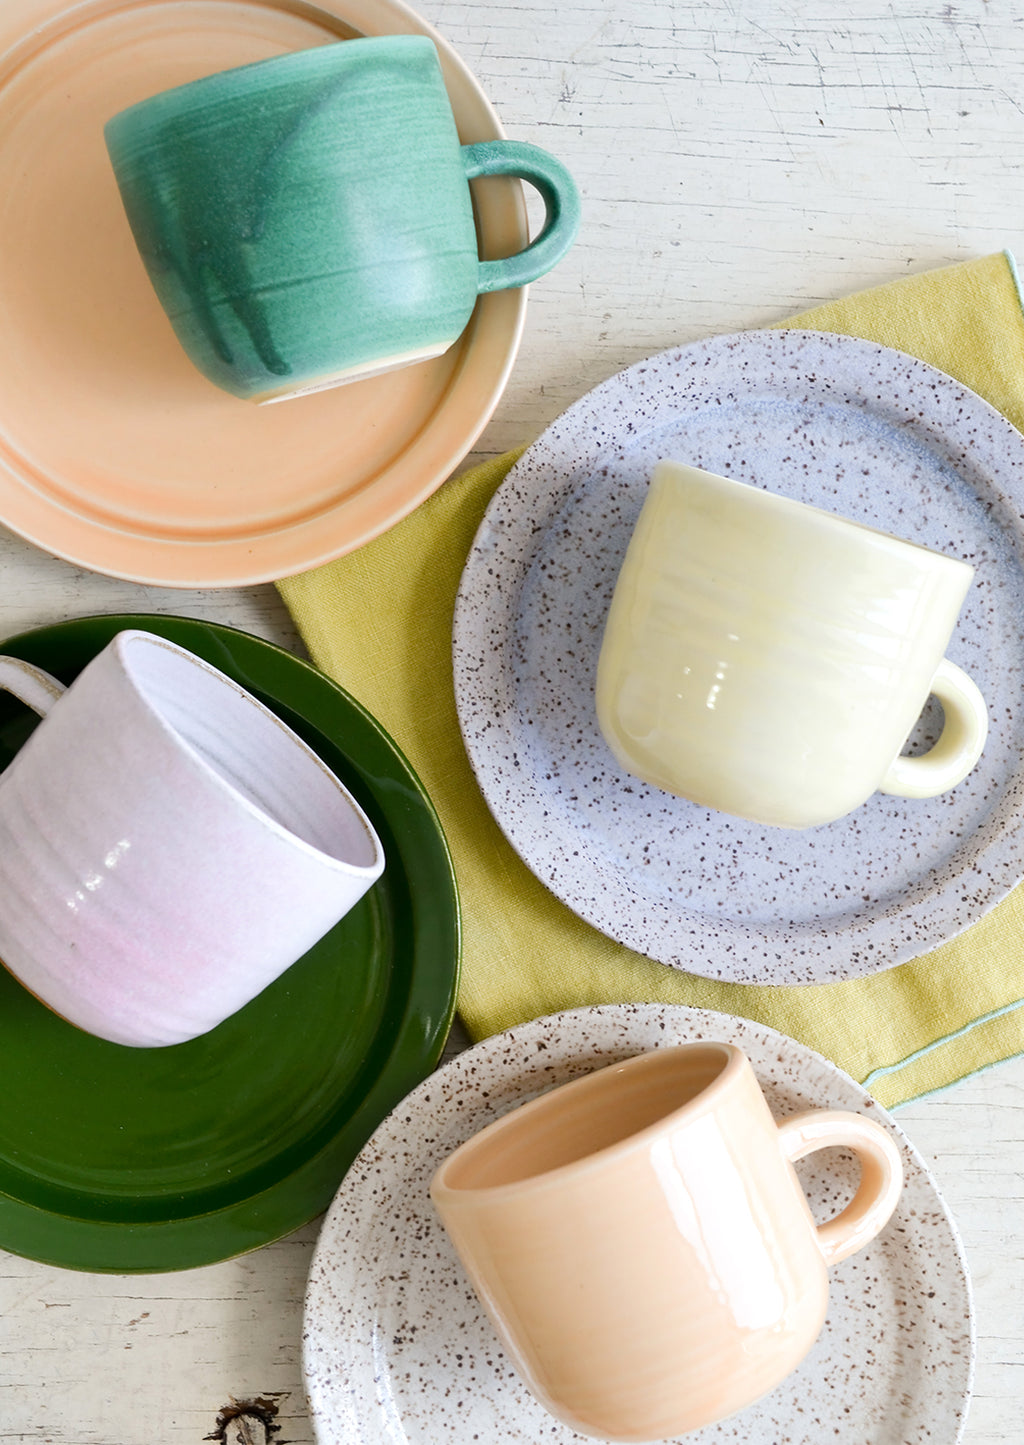 4: A mix of hand glazed plates and mugs.